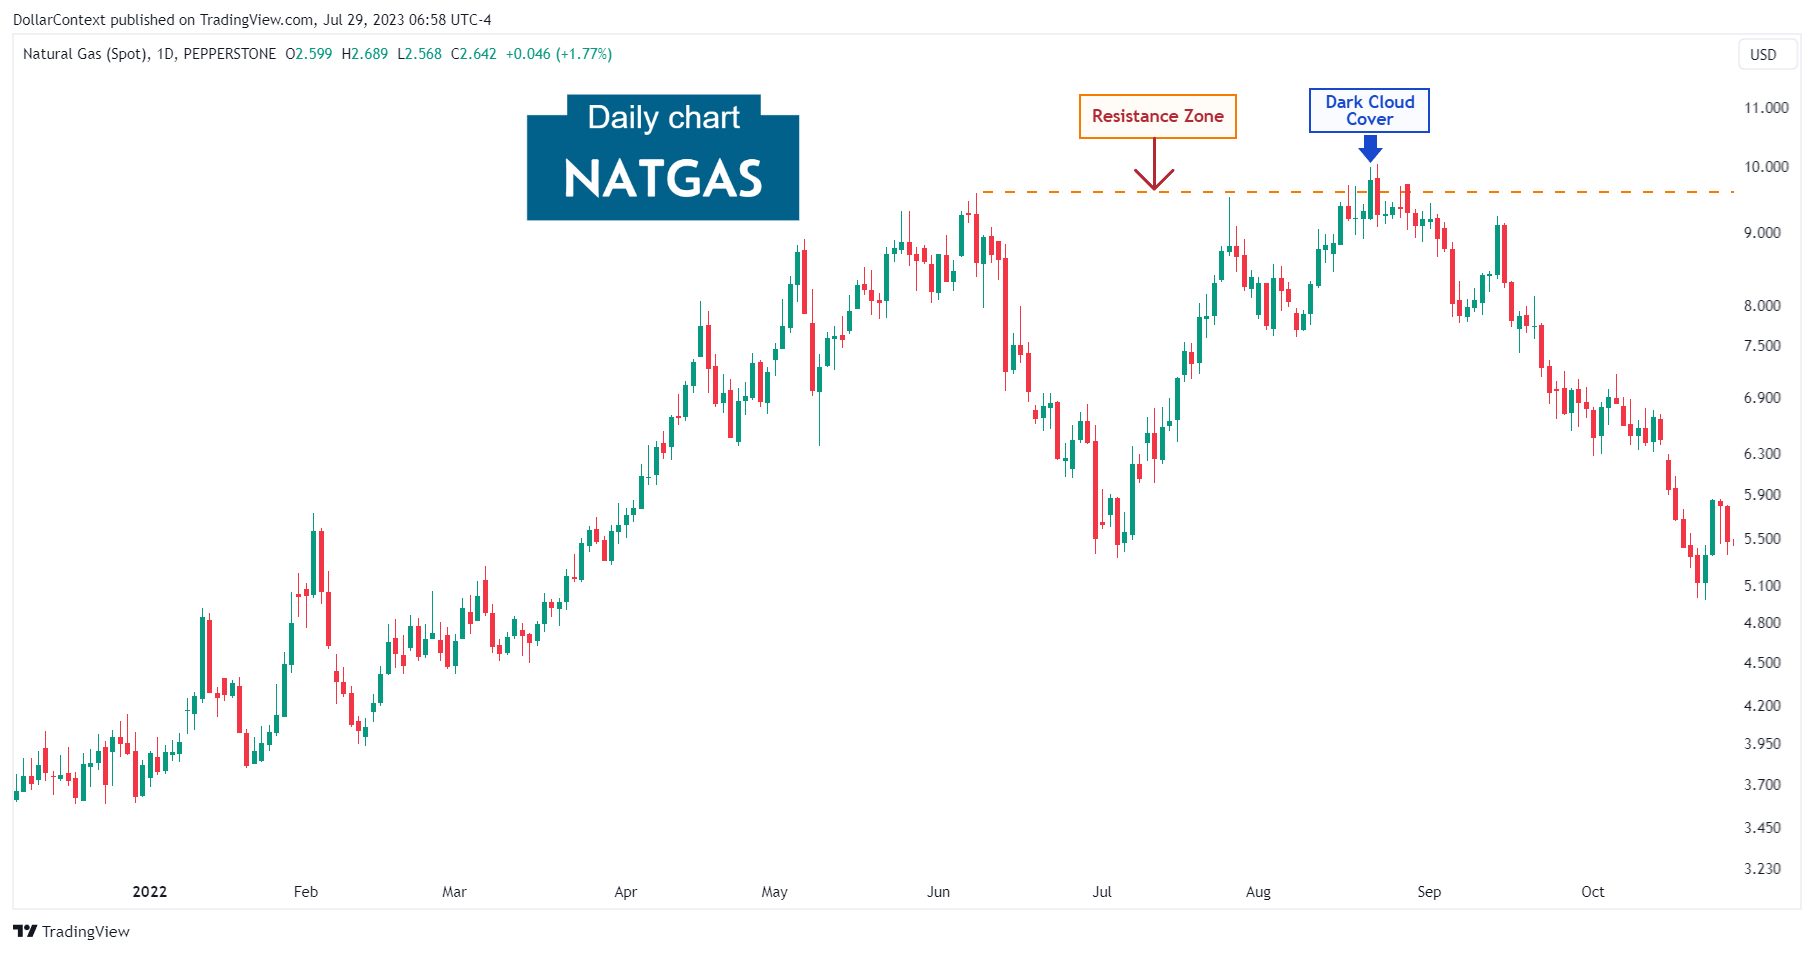 Natural Gas: Dark Cloud Cover Confirms Resistance. August 2022 (Daily Chart)